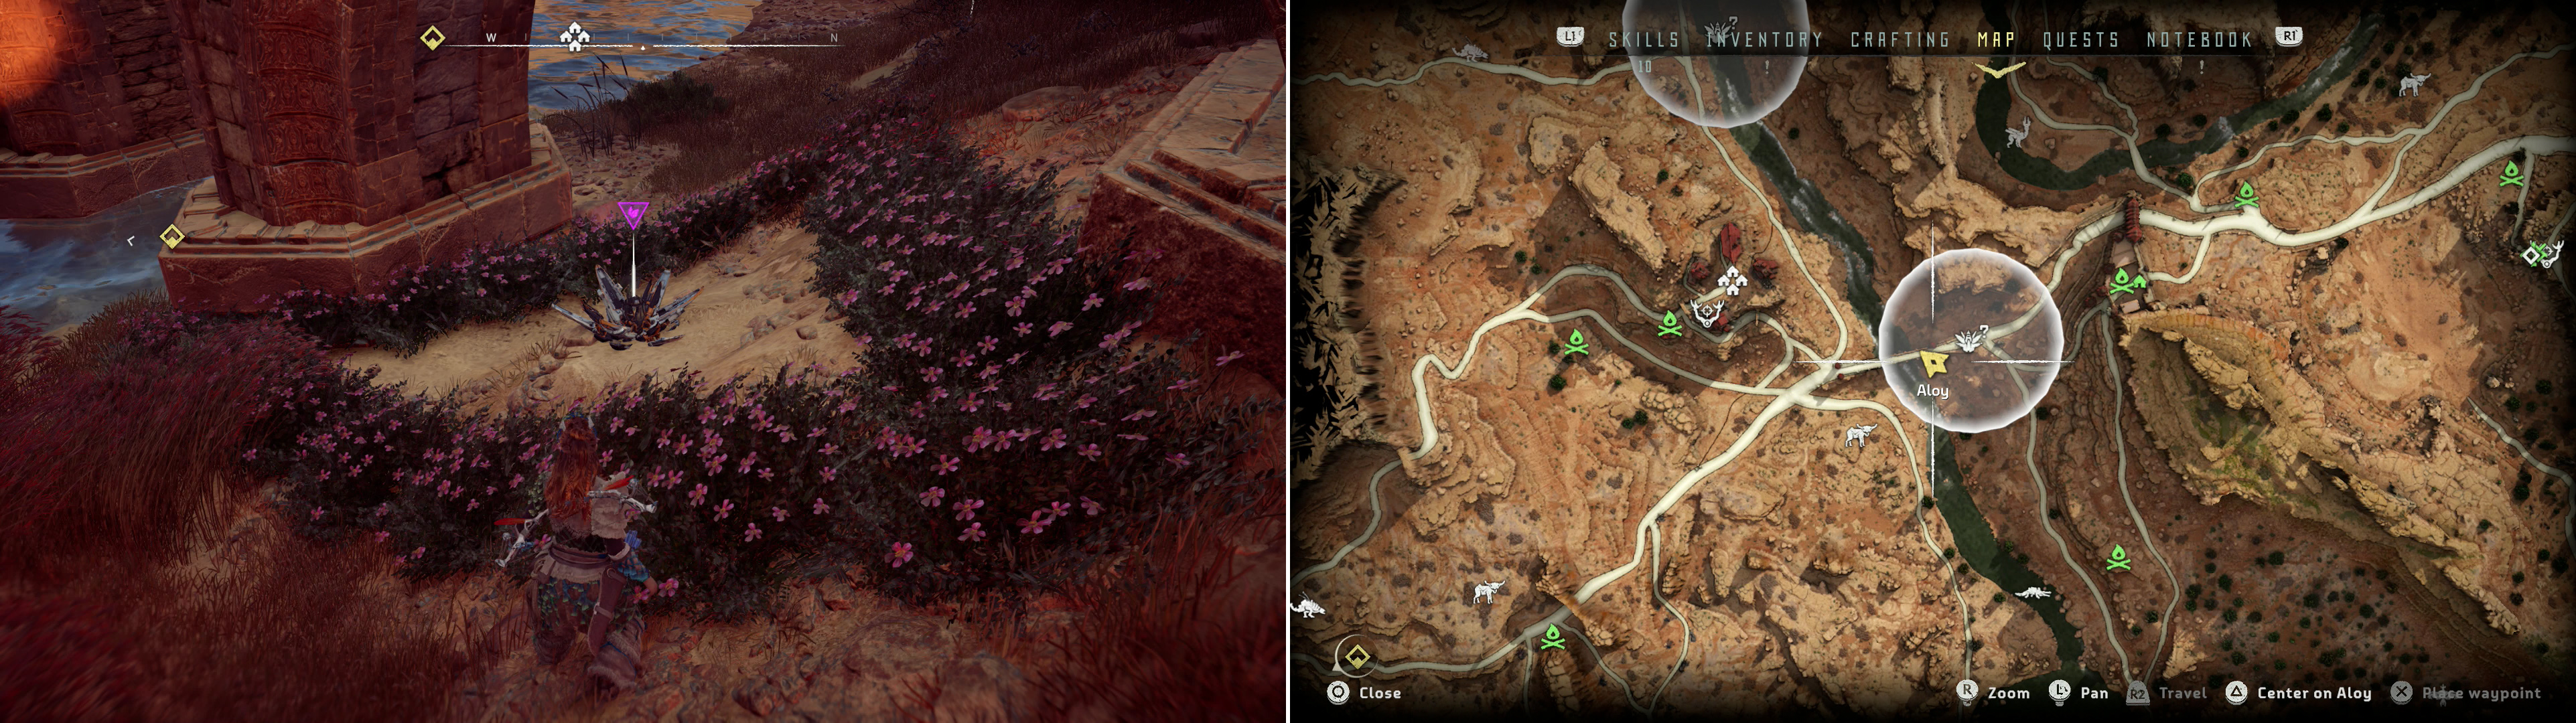 Find Metal Flower - Mark III (J) (left) at the location indicated on the map (right).